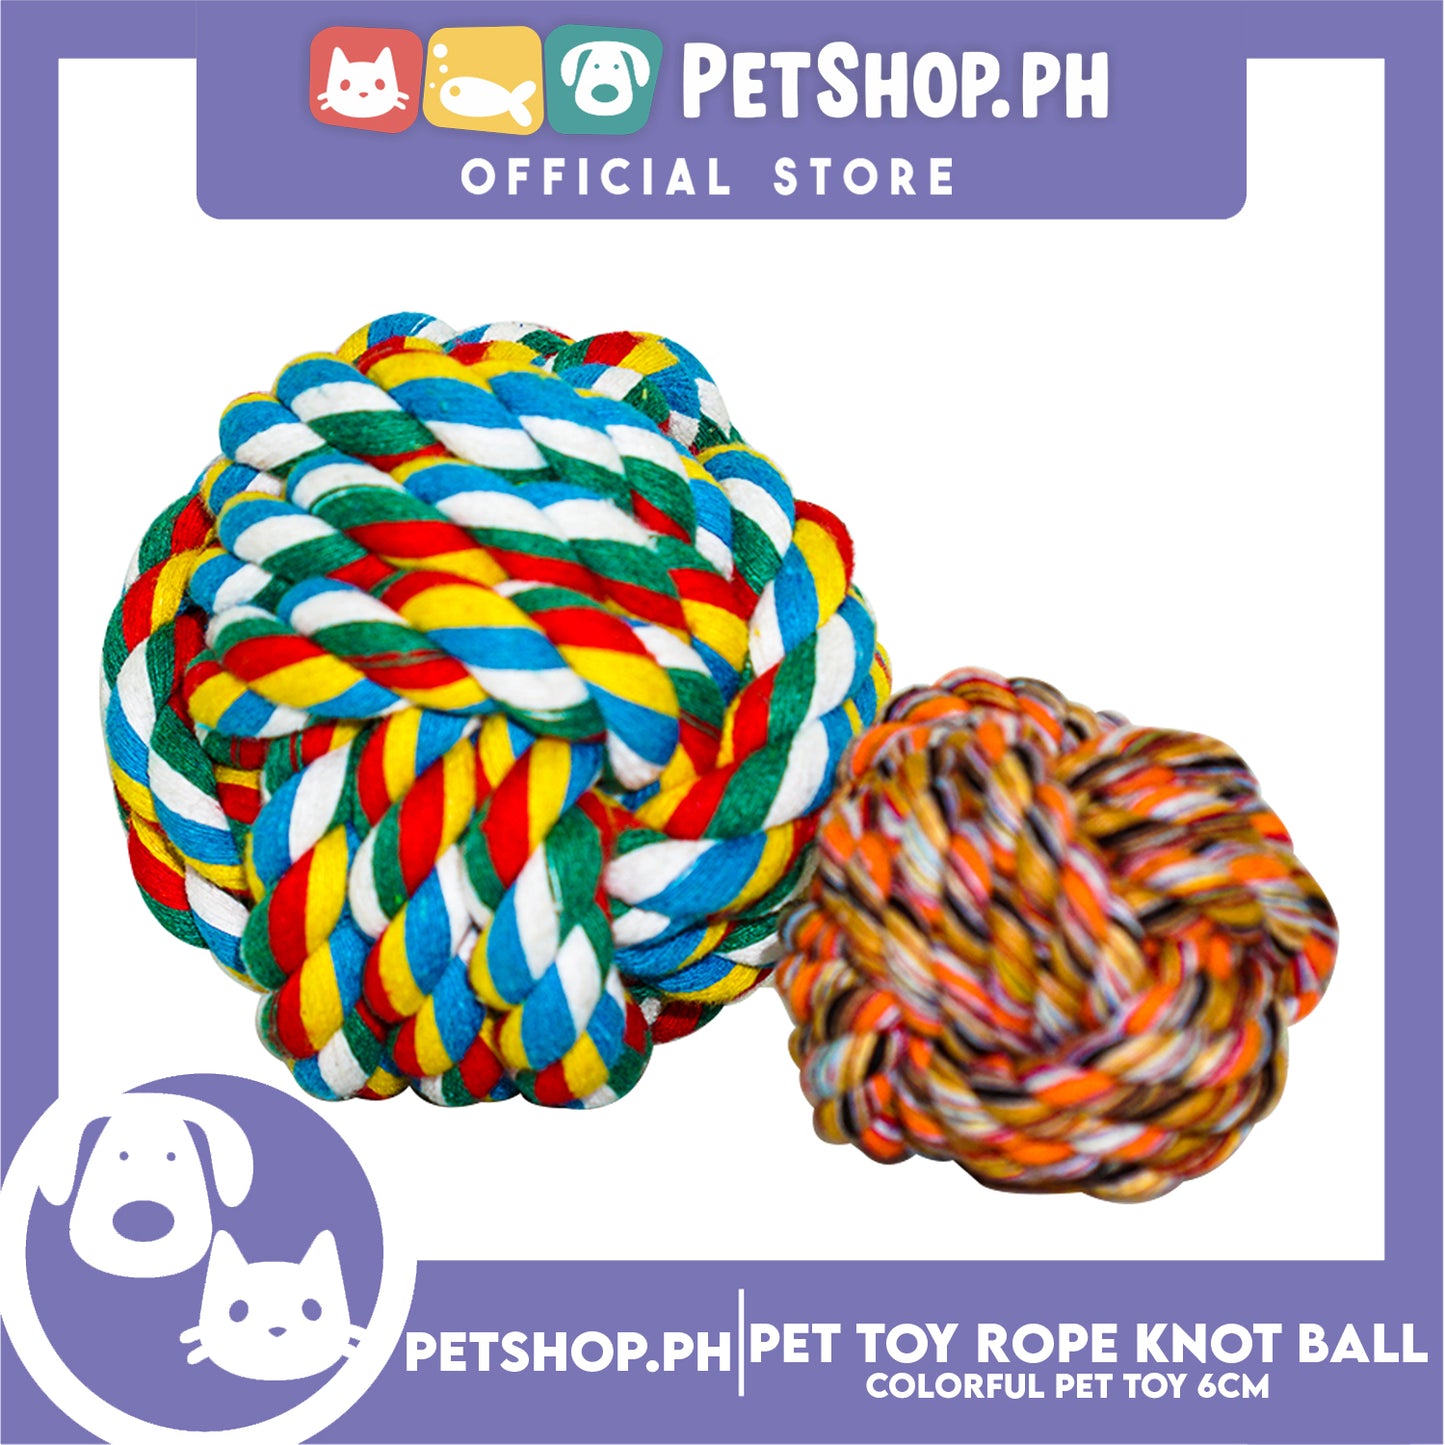 Pet Toy Colorful Rope Knot Ball 6cm for Puppies, Kittens & Small Dogs  -Teething Chew Toy, Tug Toy